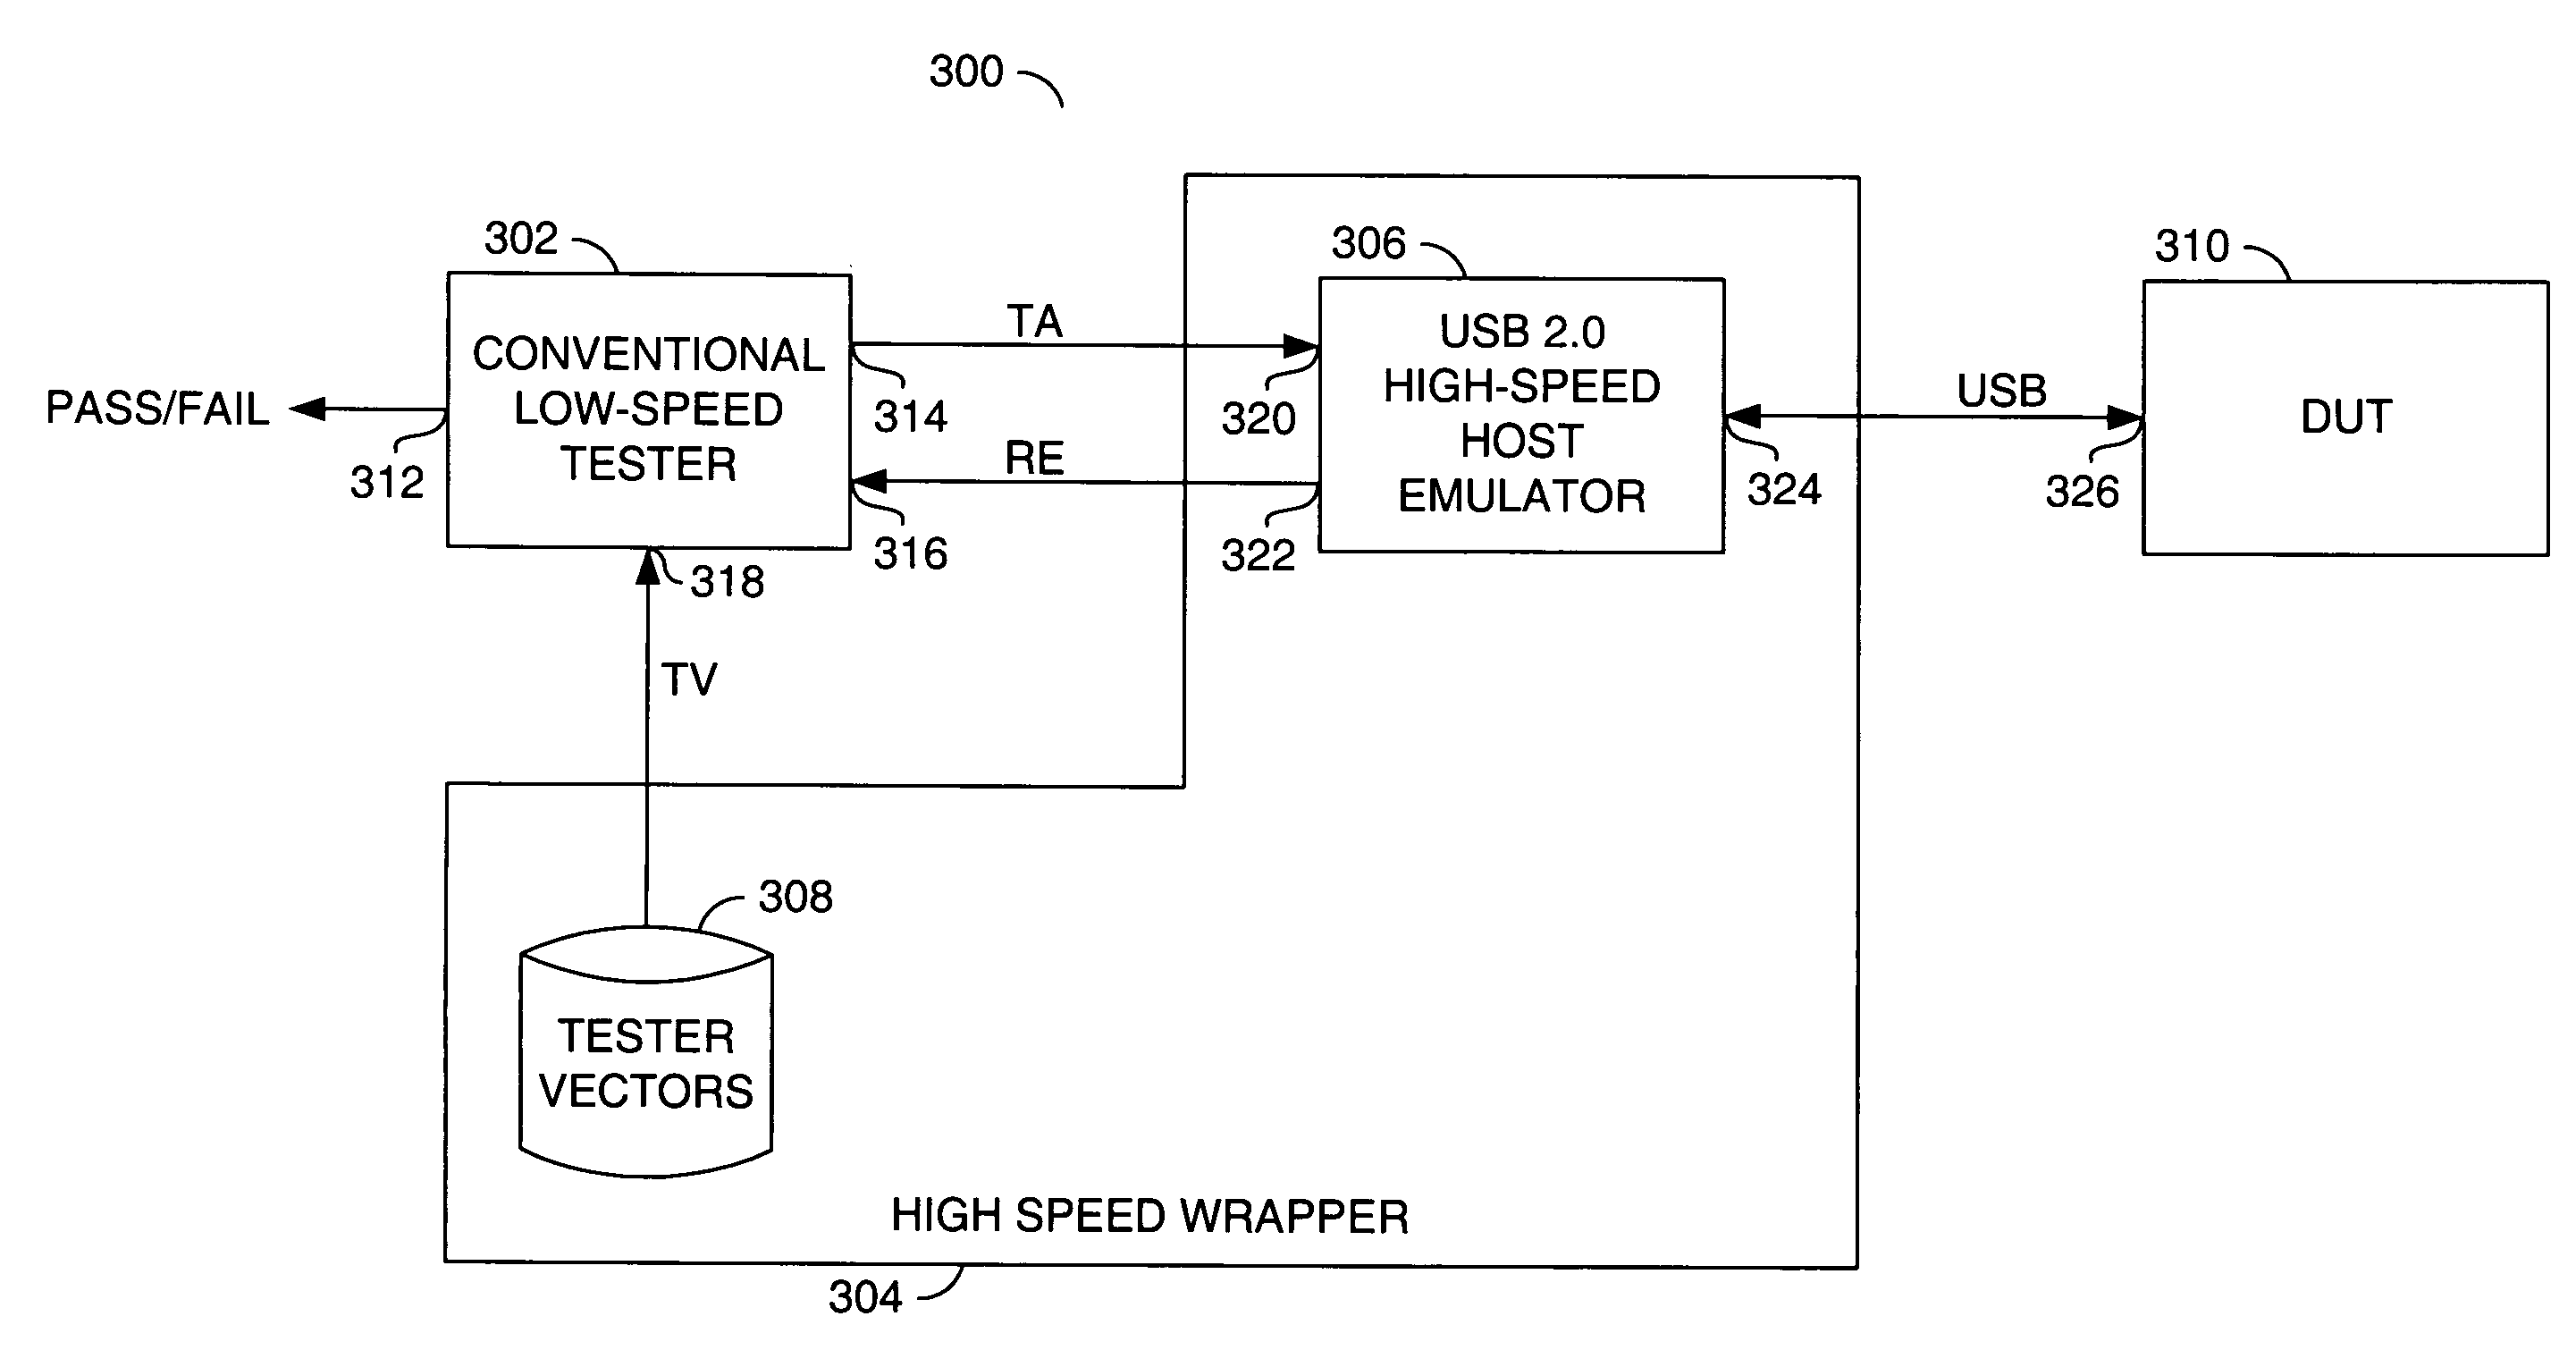 Apparatus and method to test high speed devices with a low speed tester